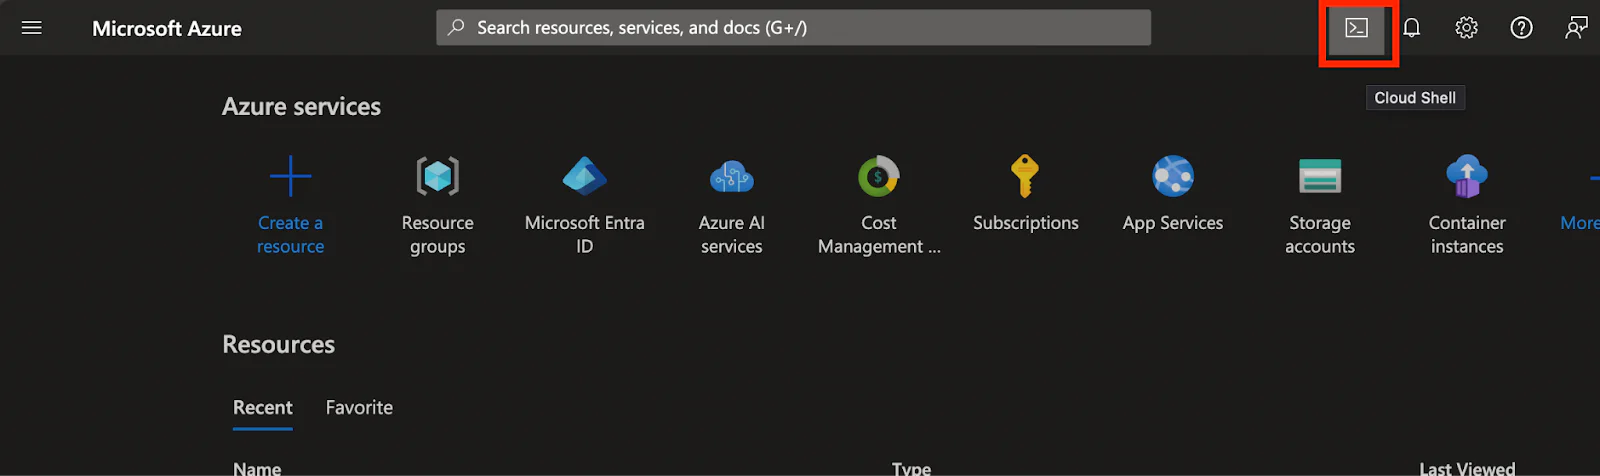 Azure Portal with Cloud Shell icon on top right highlighted.